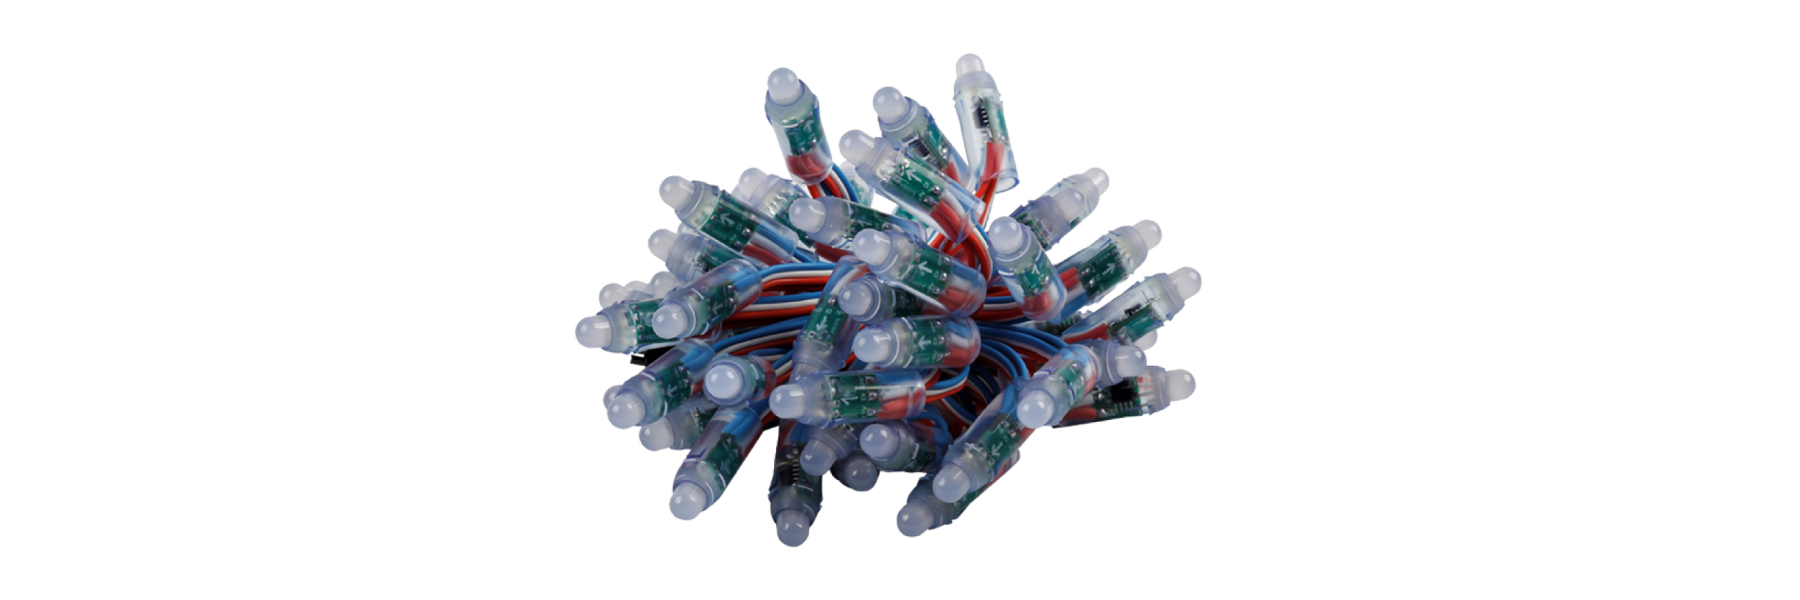   LED pixel modules consist of 50 individually...